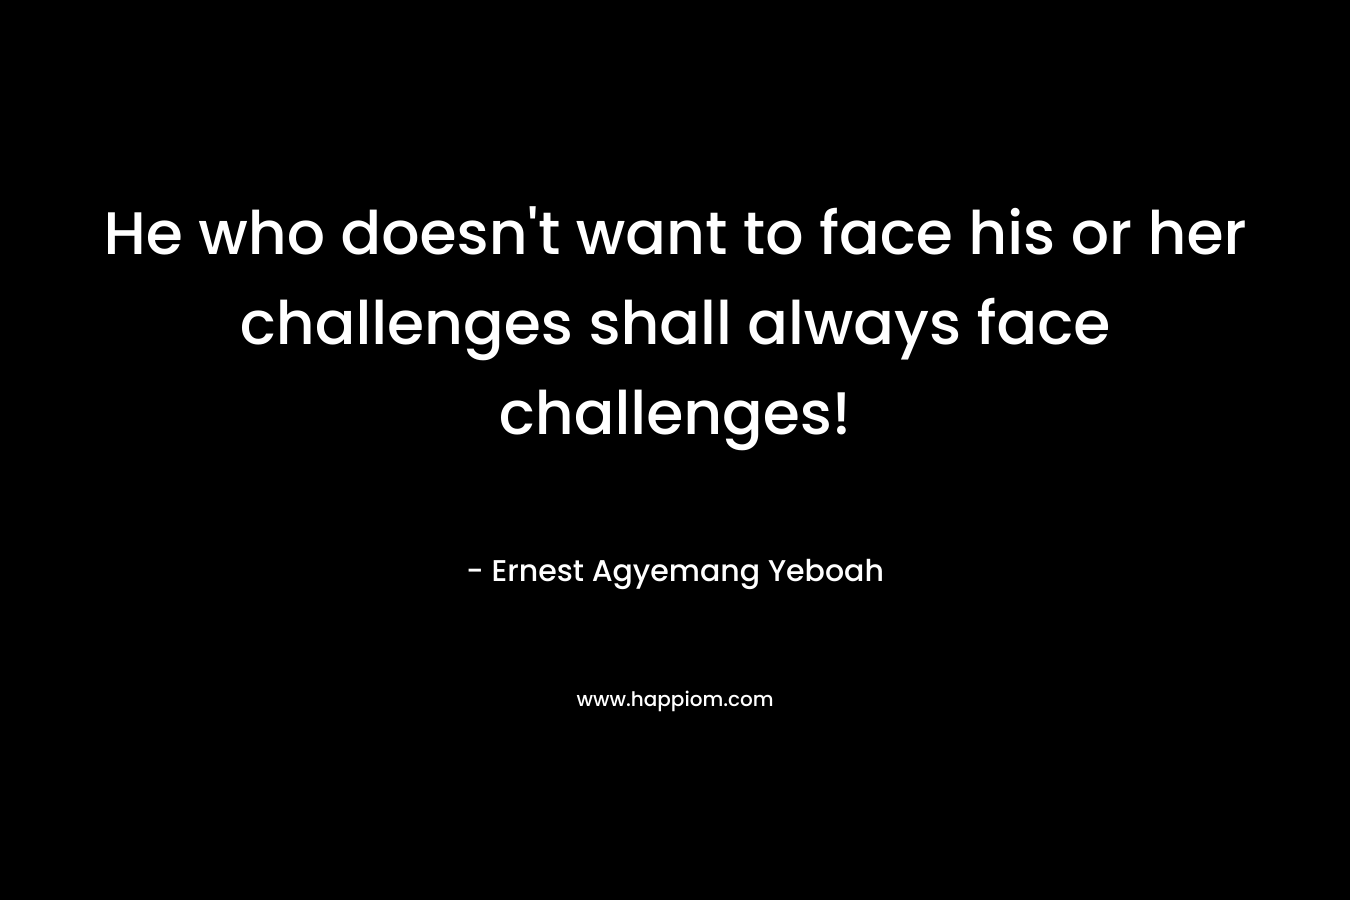 He who doesn't want to face his or her challenges shall always face challenges!